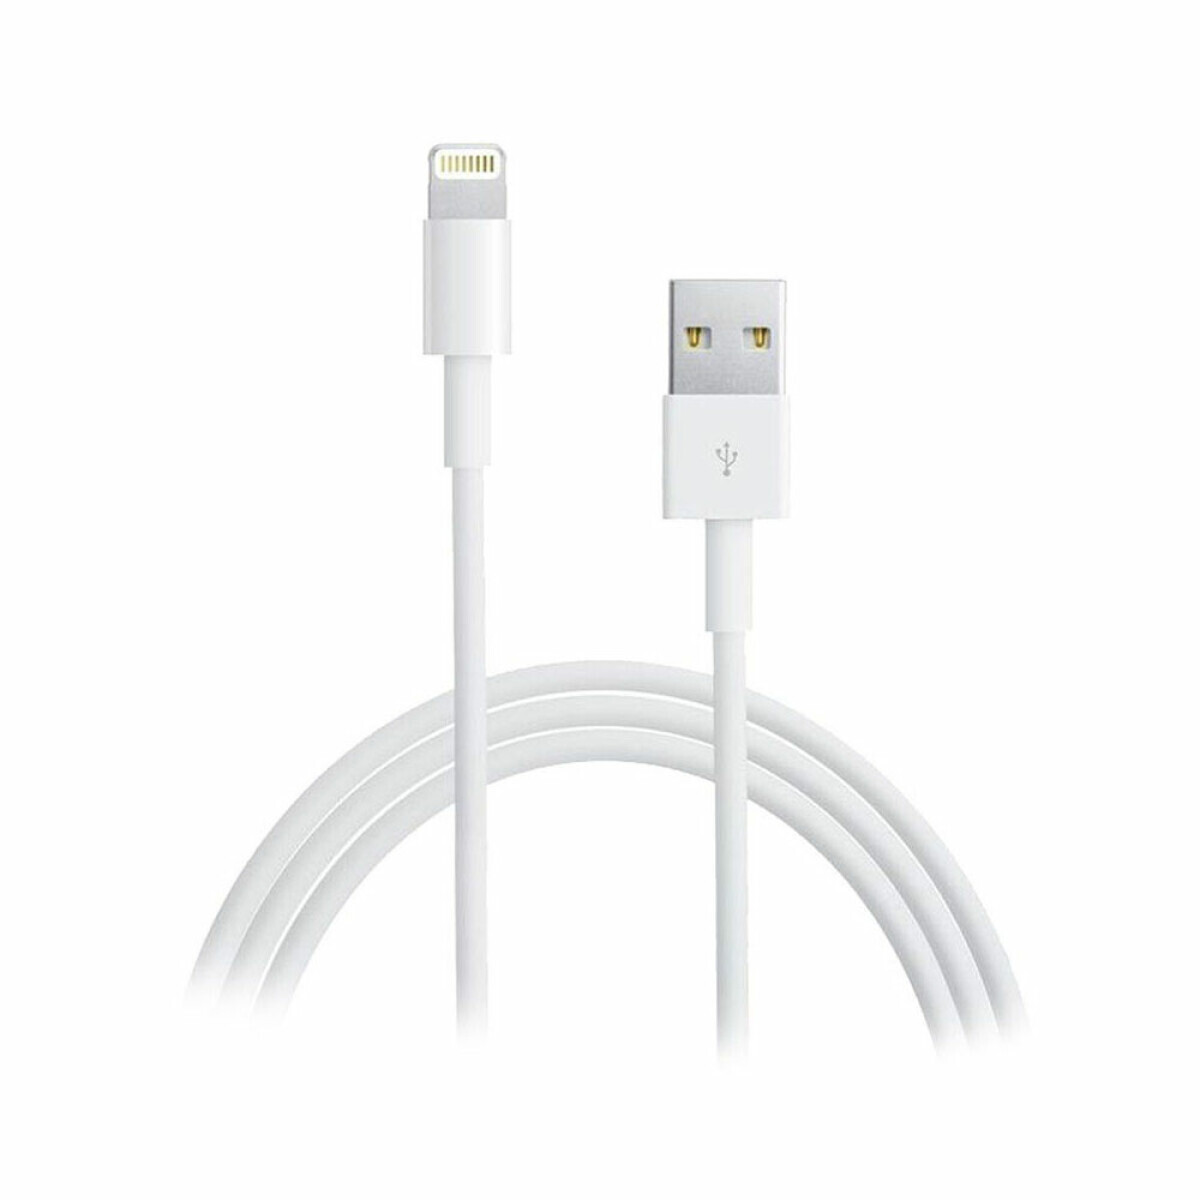 Cable USB a Lightning 1mt Blanco - Cable Usb A Lightning 1mt Blanco 